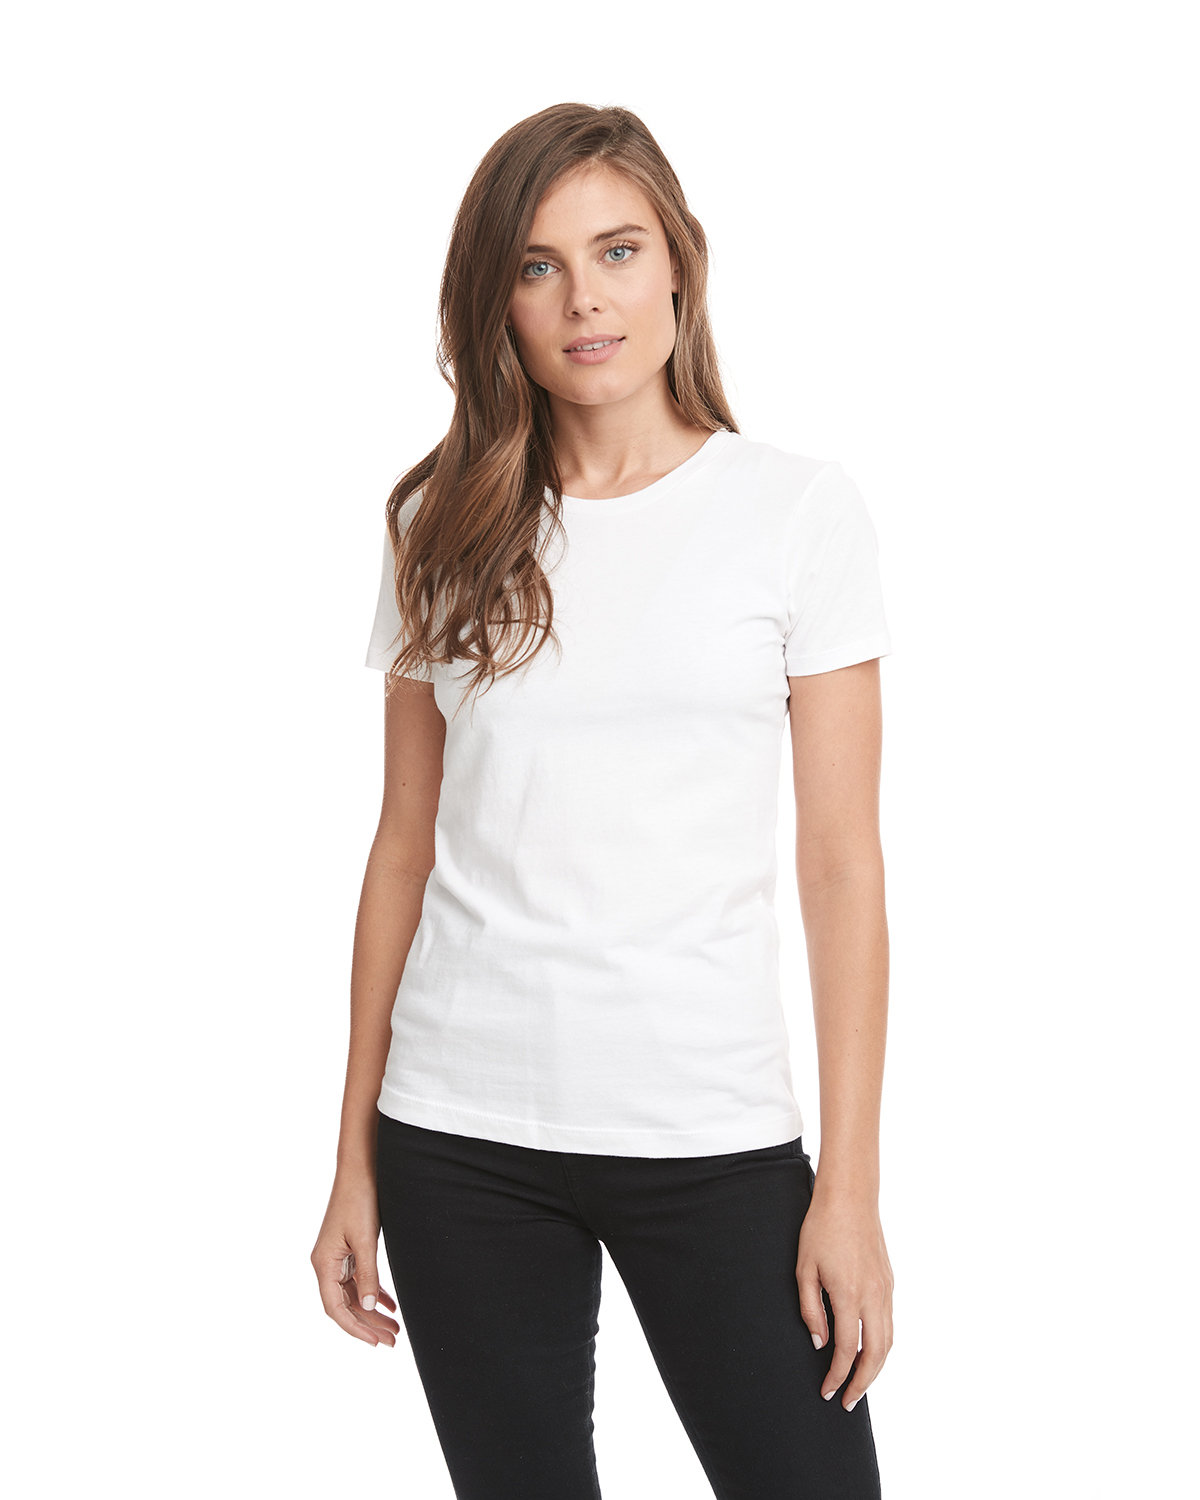 Discover the latest in Womens Tops